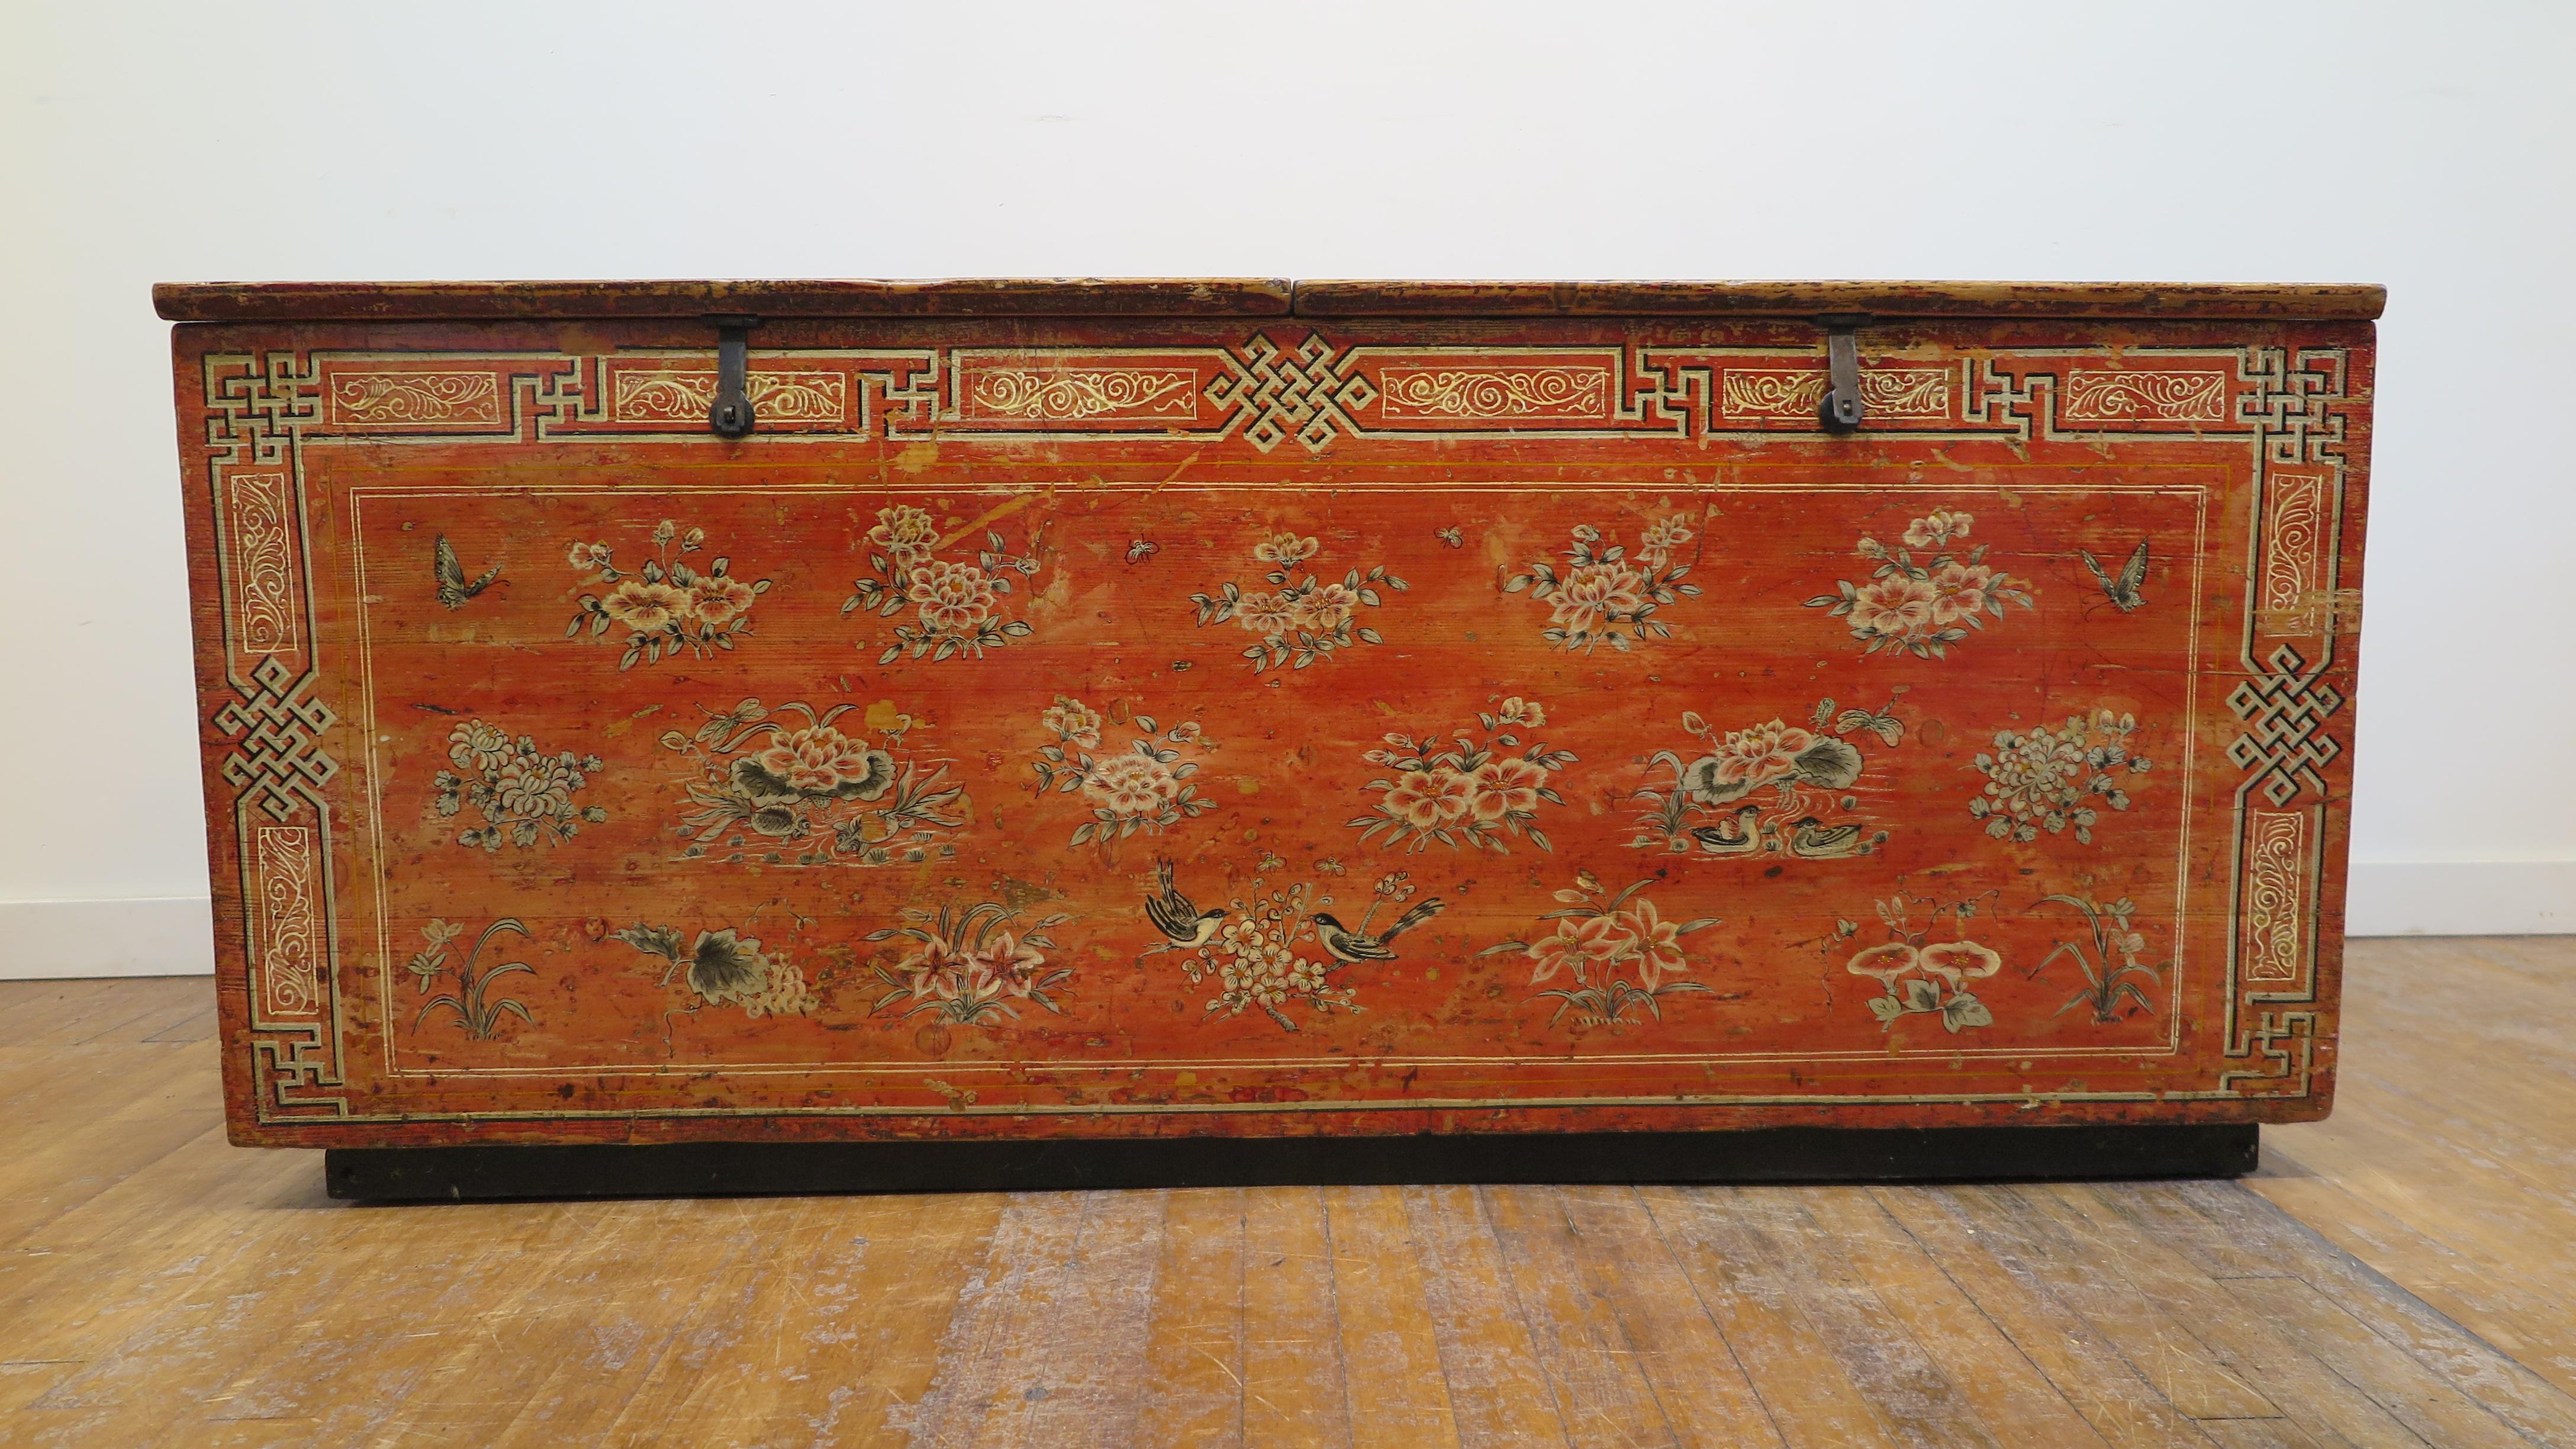 A beautifully painted Mongolian wooden chest of the 19th century. This is a wonderful example exhibiting the art work in the region. Large hand made hand decorated Mongolian painted storage chest. A well preserved patina showcasing its history alive